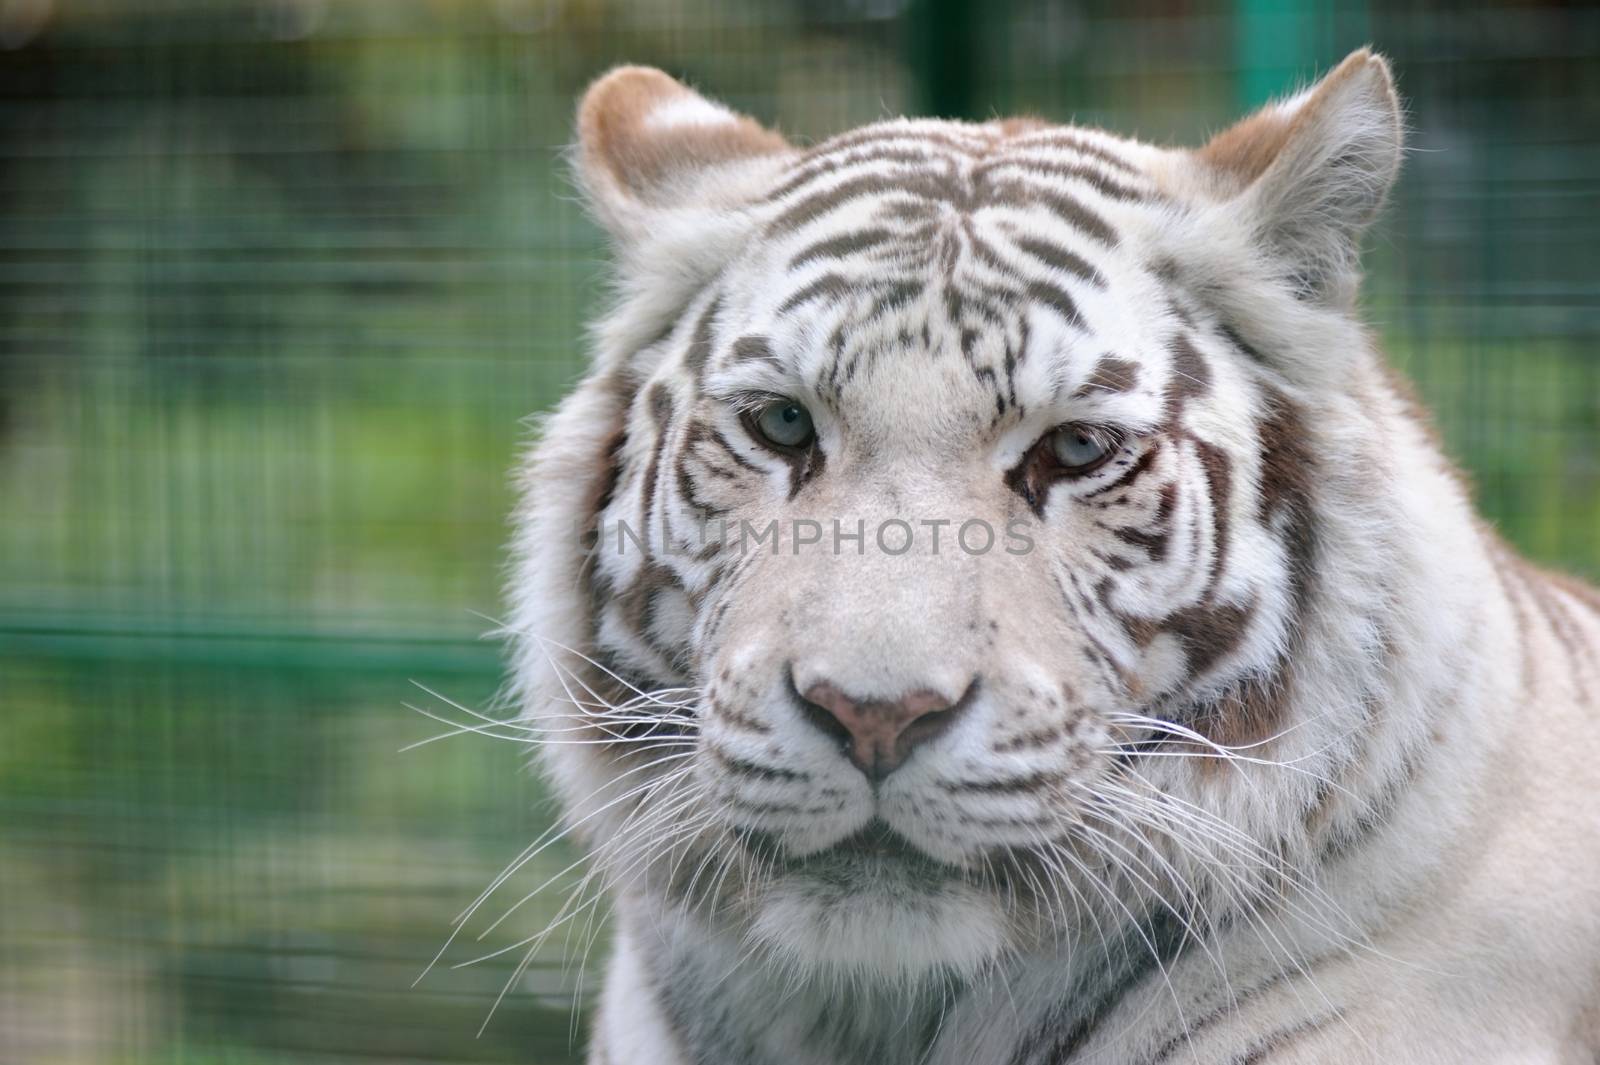 White tiger close-up by kmwphotography